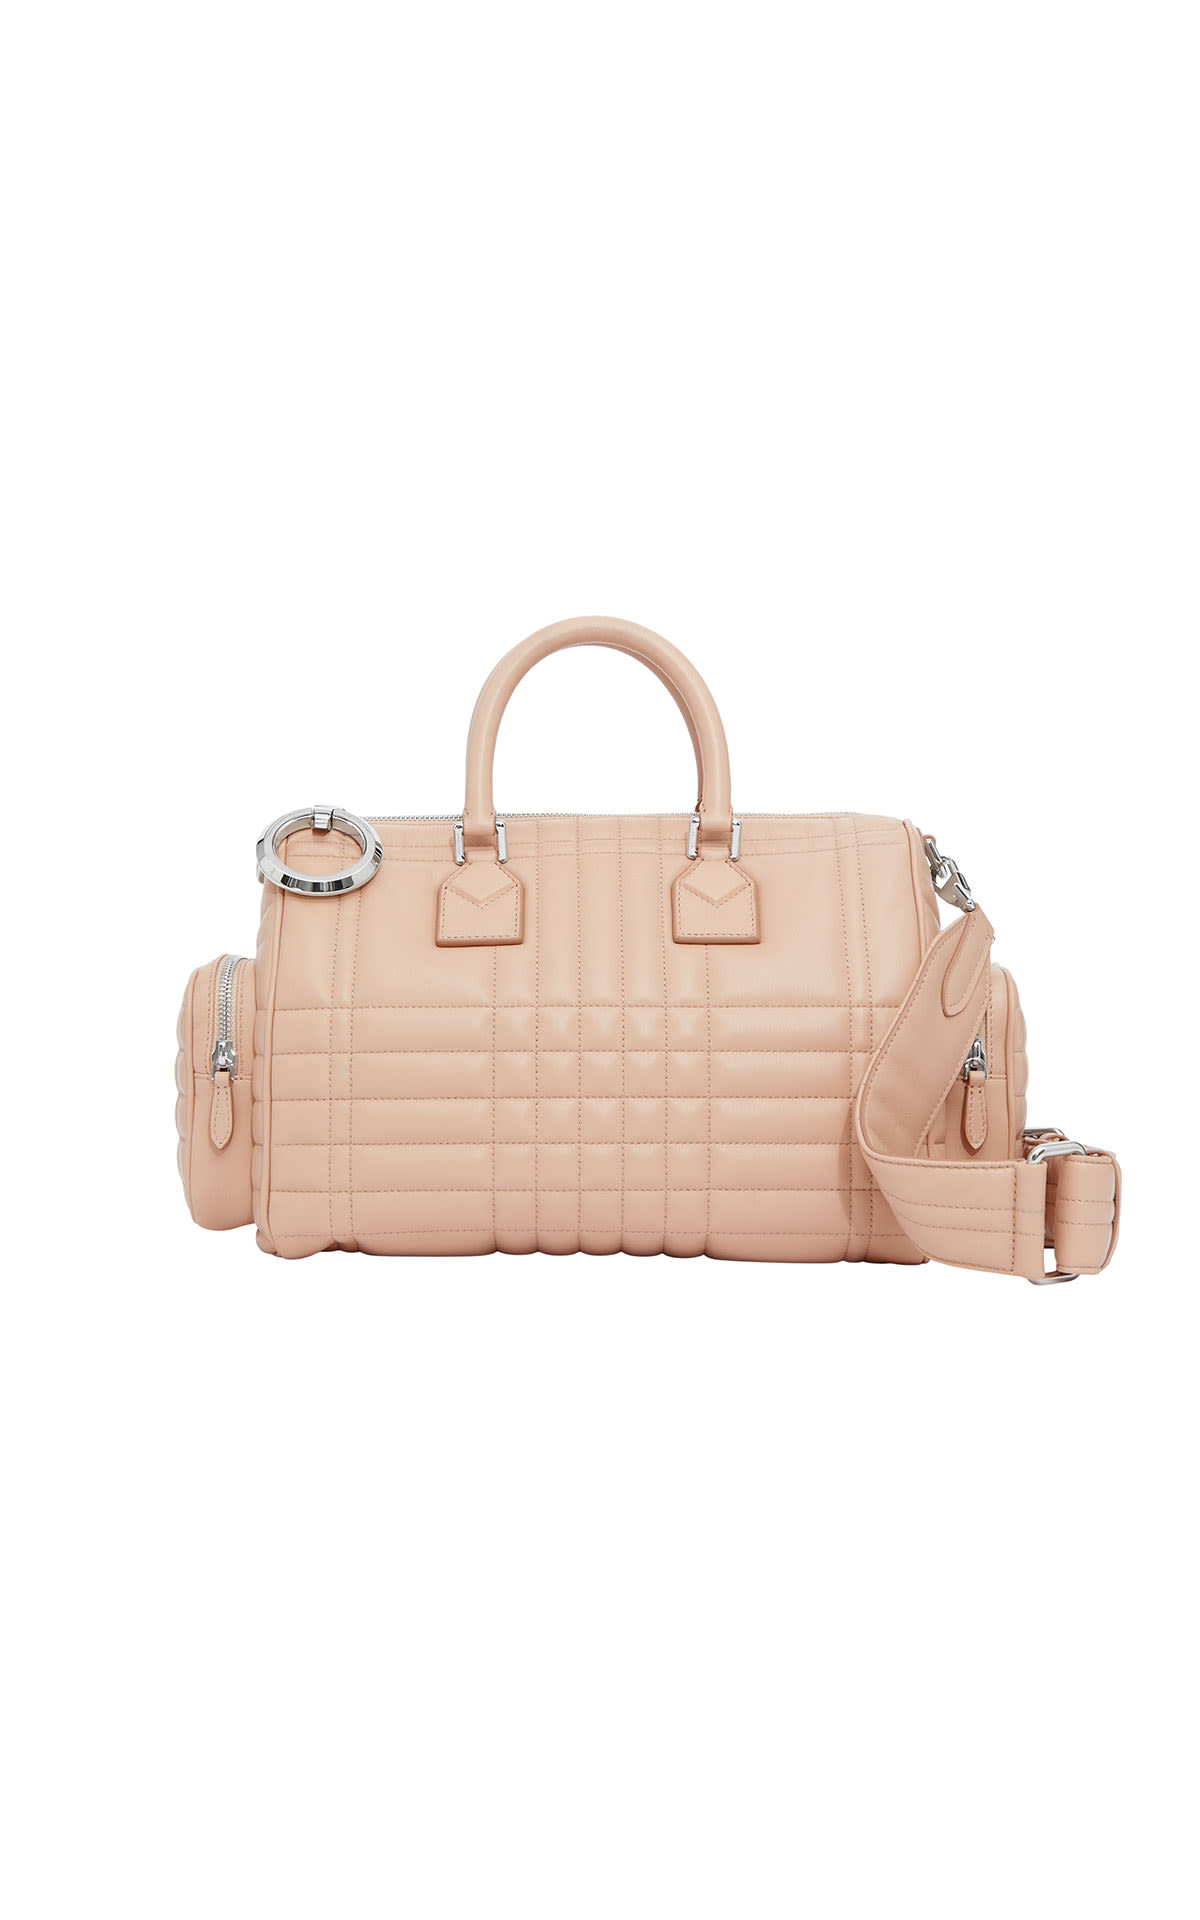 Burberry Women's bag pink from Bicester Village